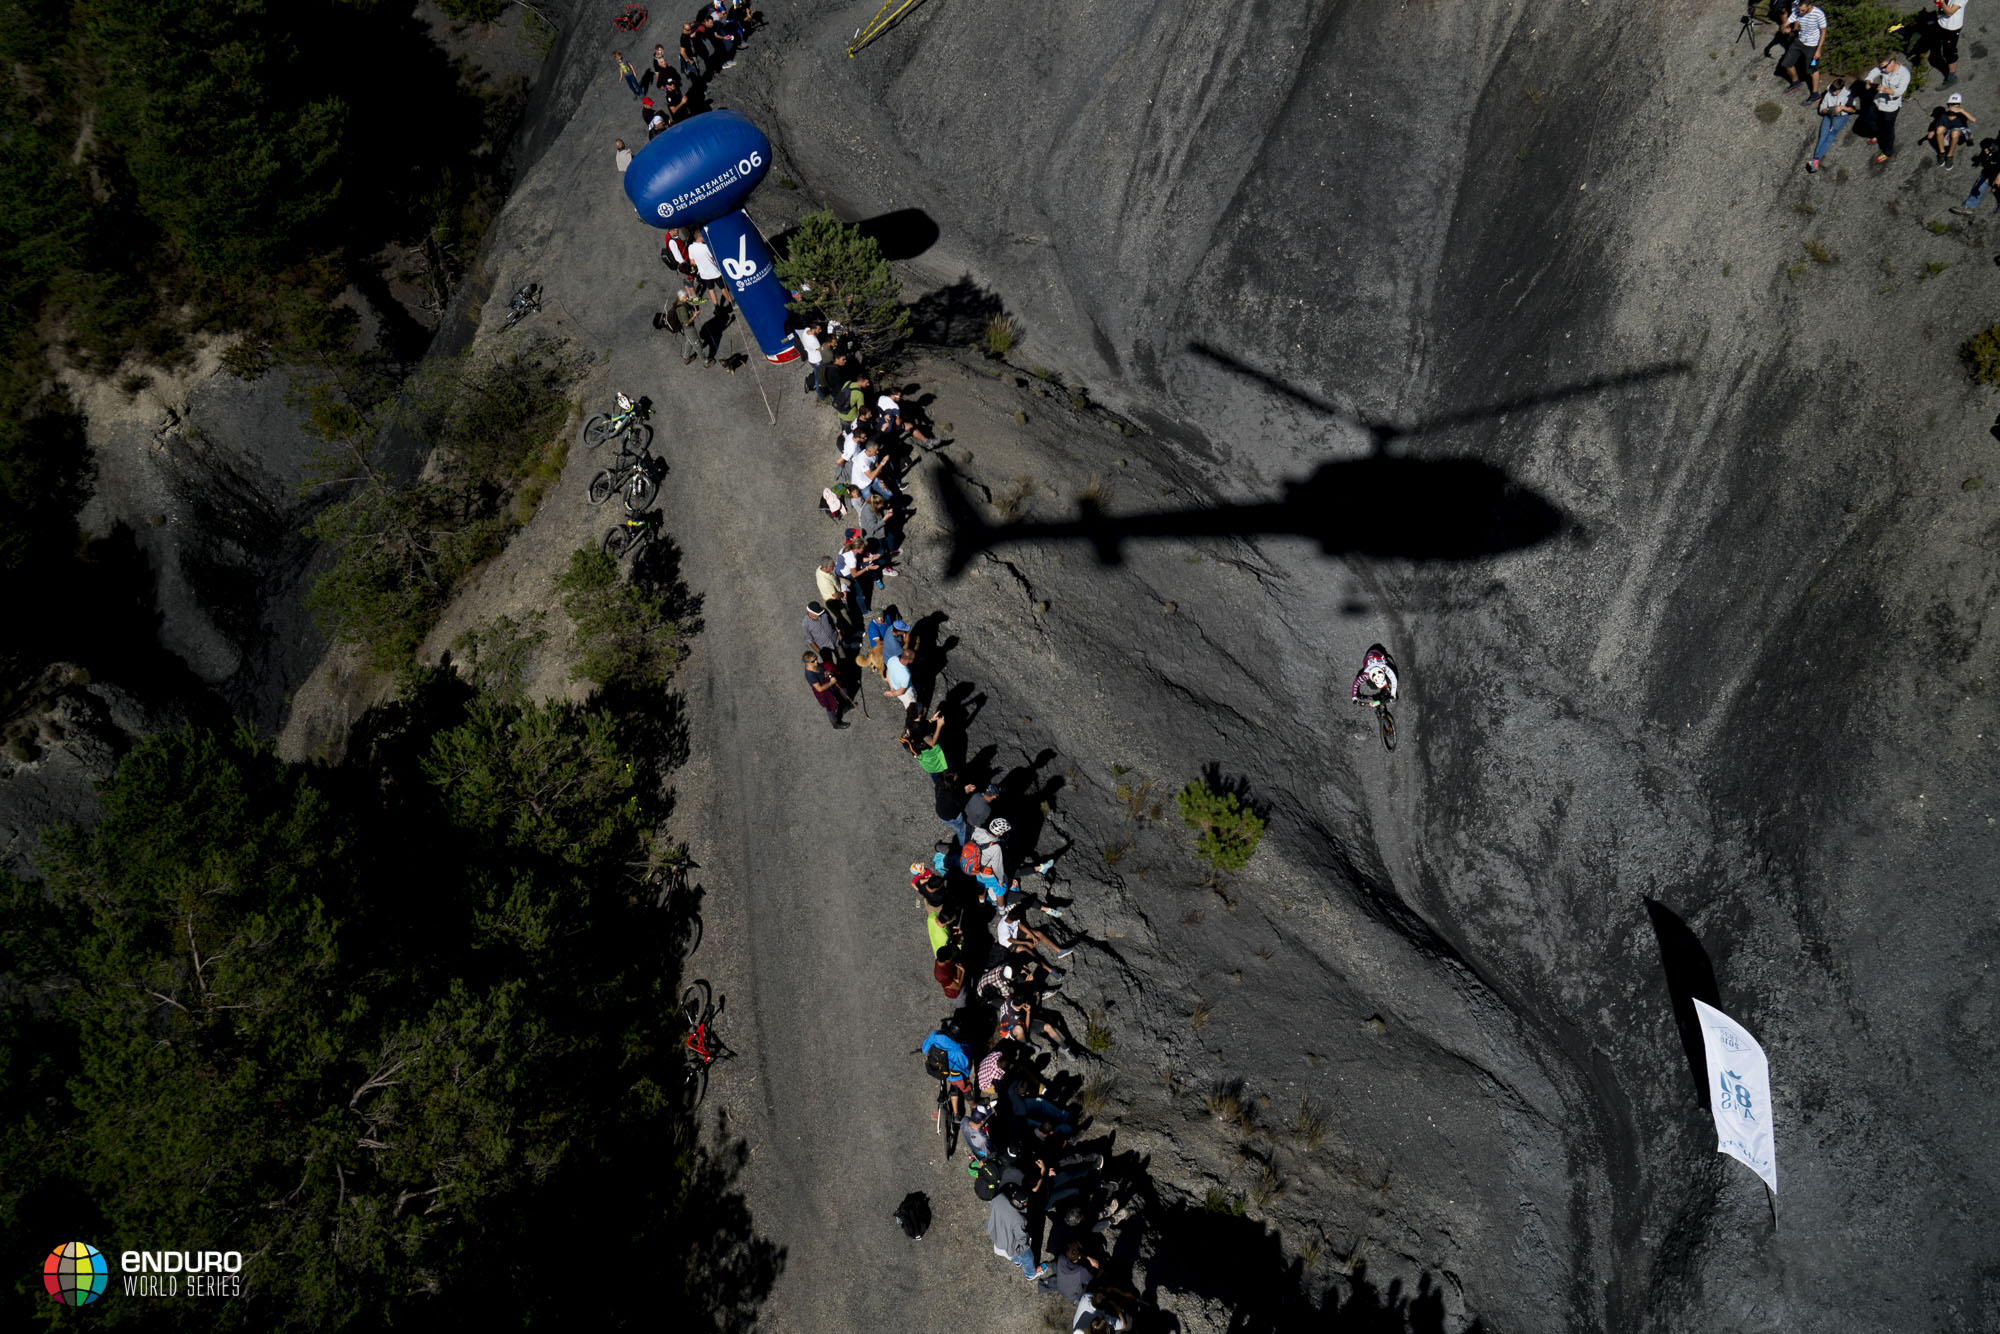 The crowds lined the canyon section